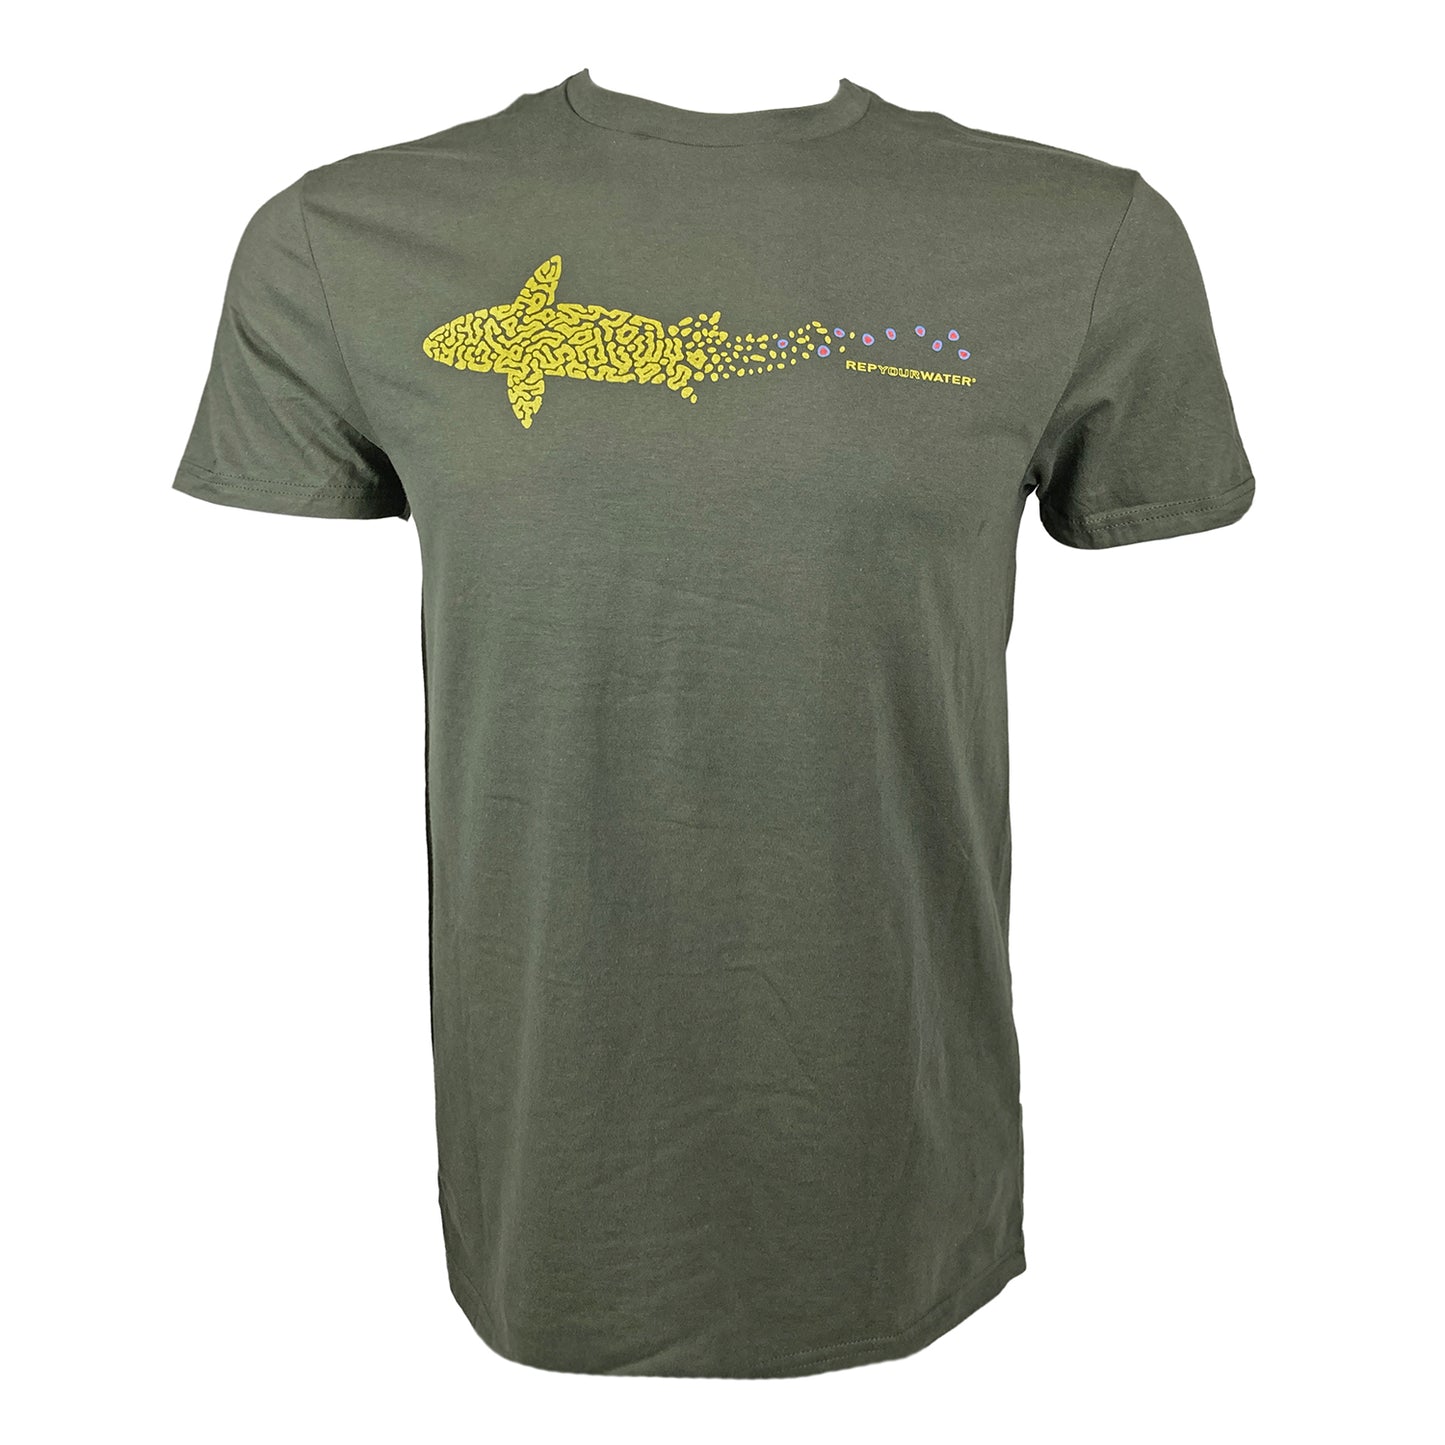 Green tee with artistically rendered brook trout in brook trout colors across the chest.